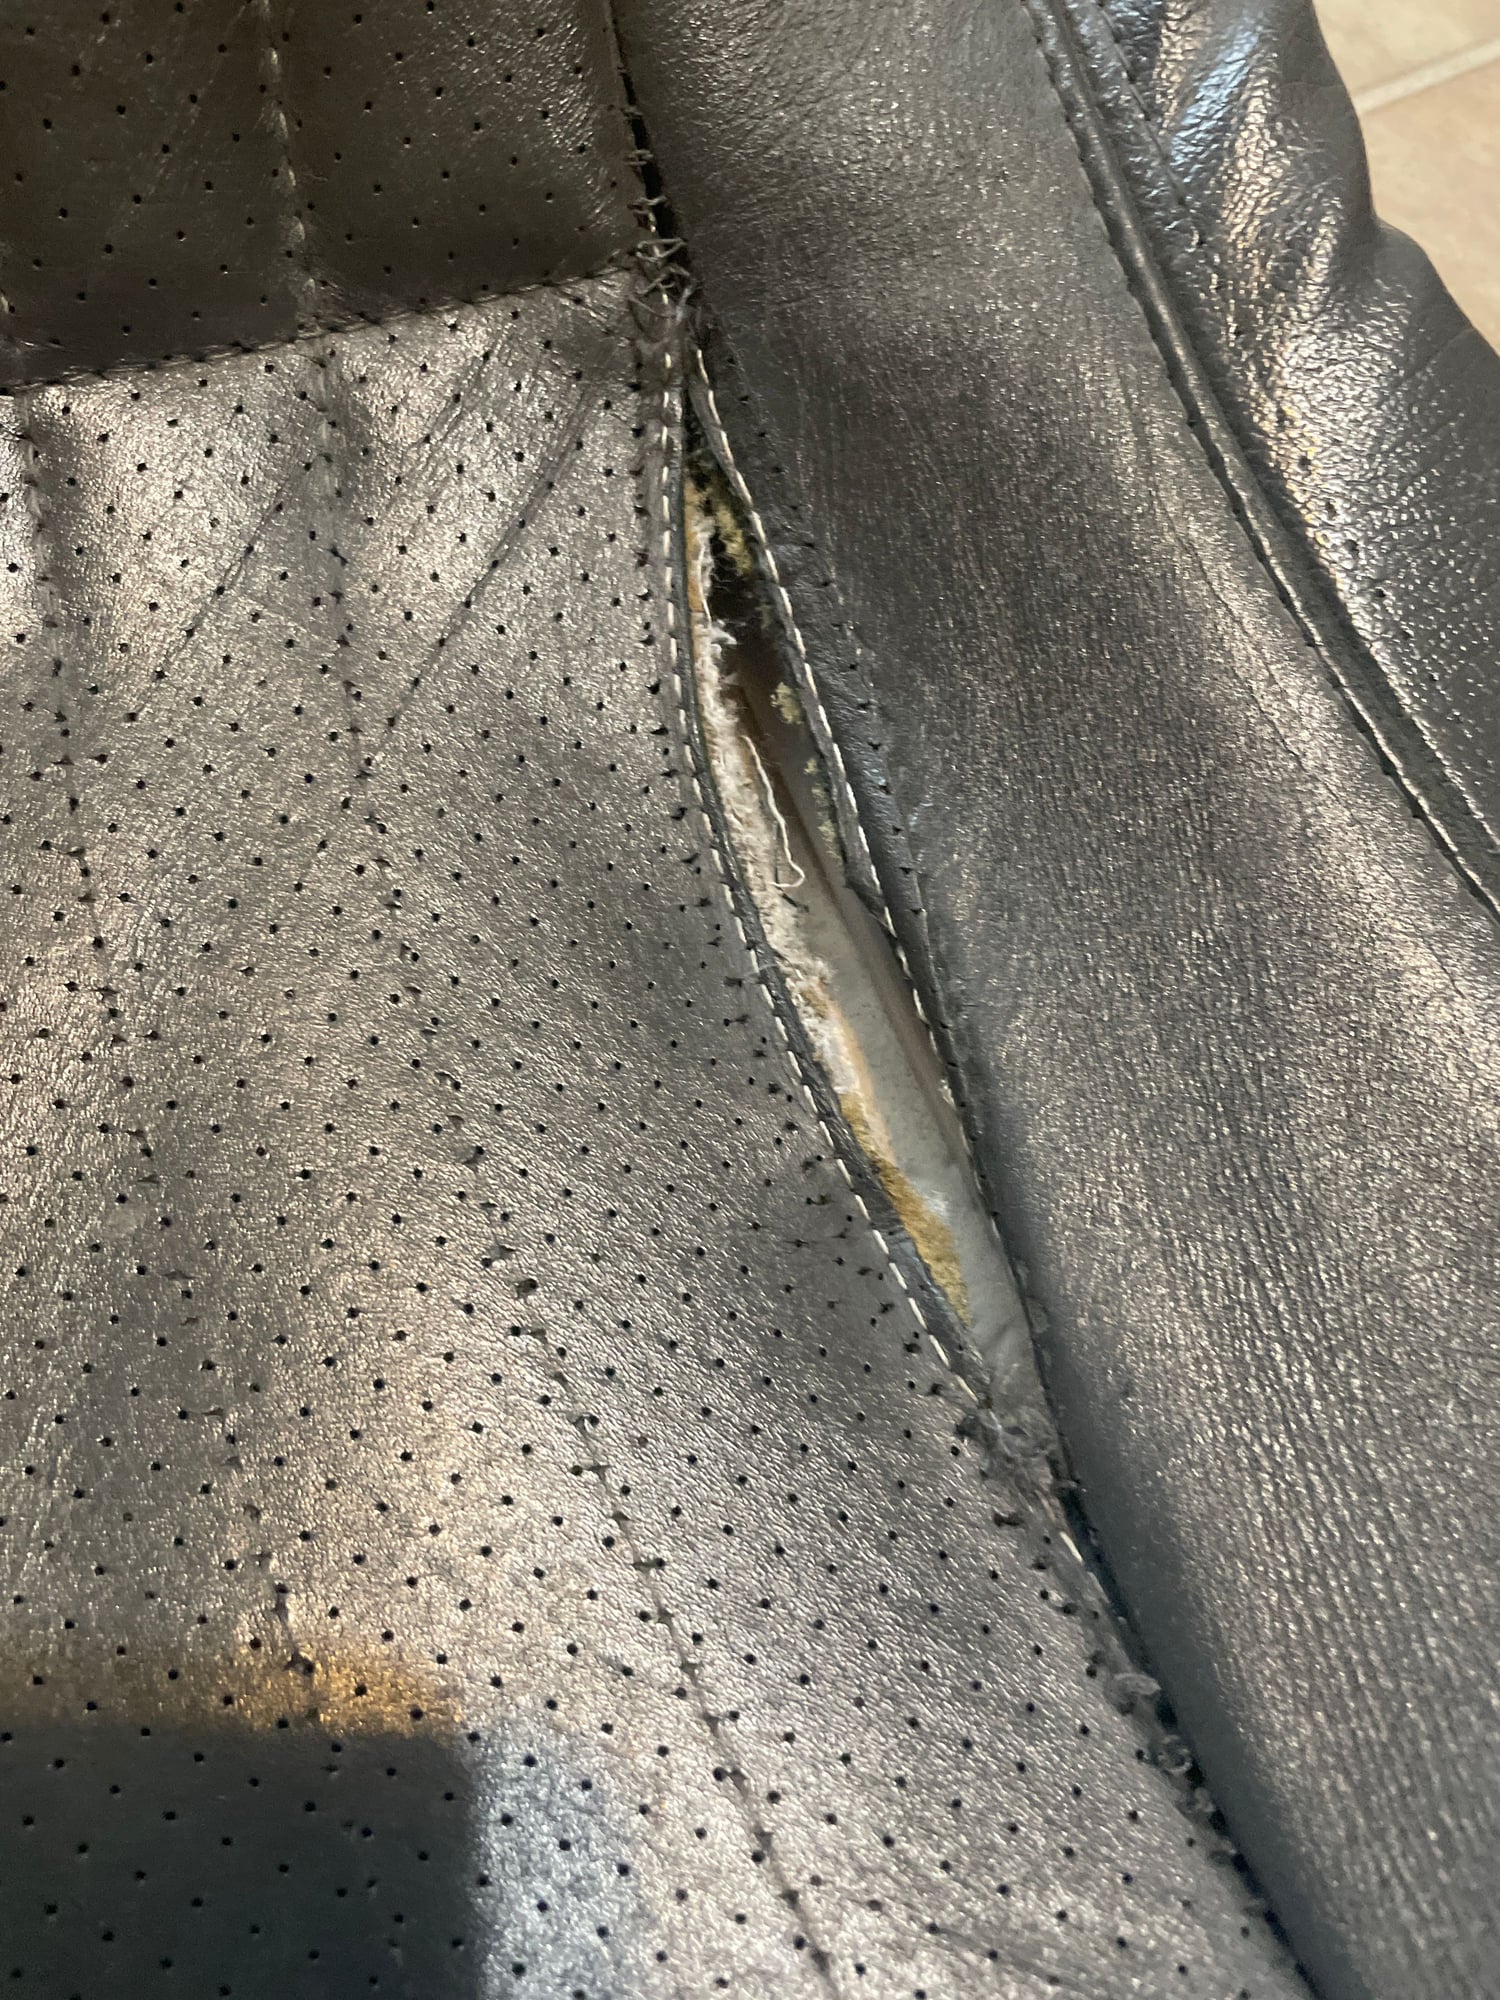 Interior/Upholstery - 4th gen Firebird Trans Am driver leather seat bottom - Used - All Years  All Models - O’fallon, IL 62269, United States